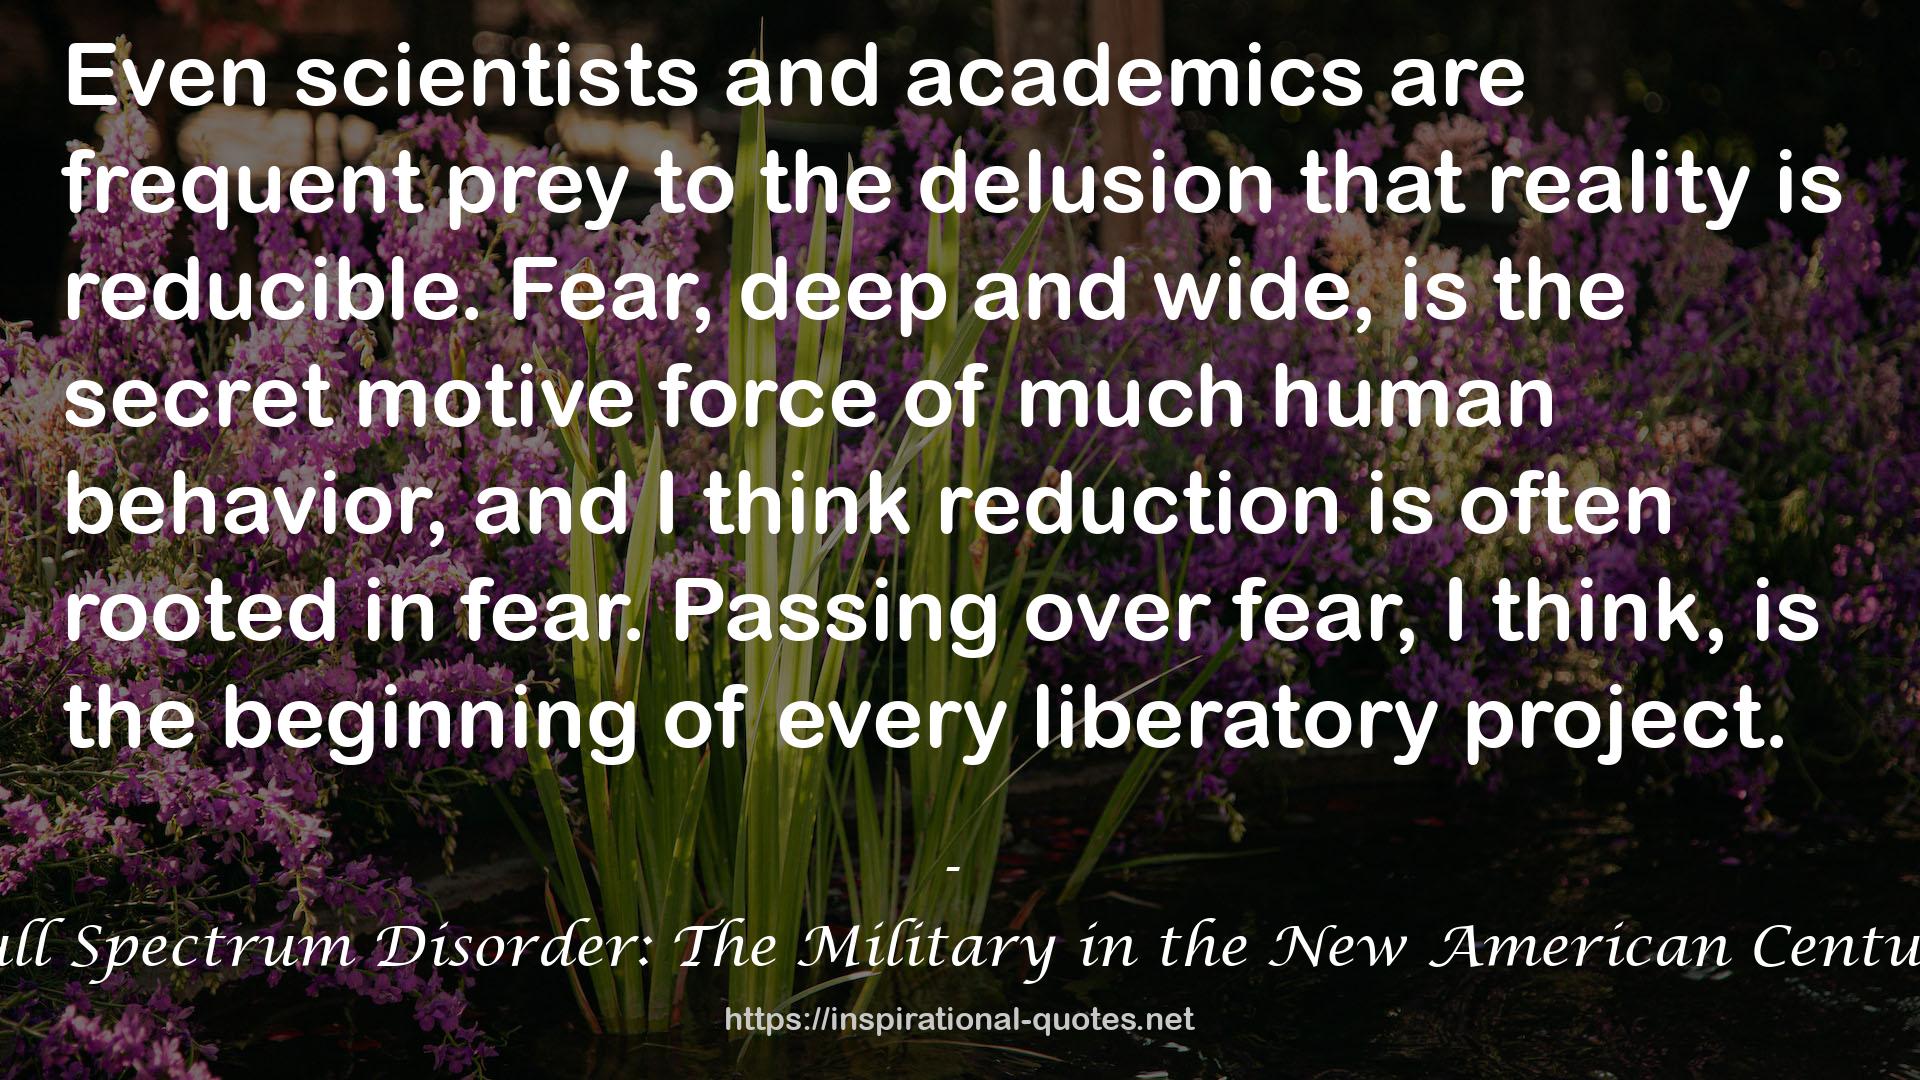 Full Spectrum Disorder: The Military in the New American Century QUOTES